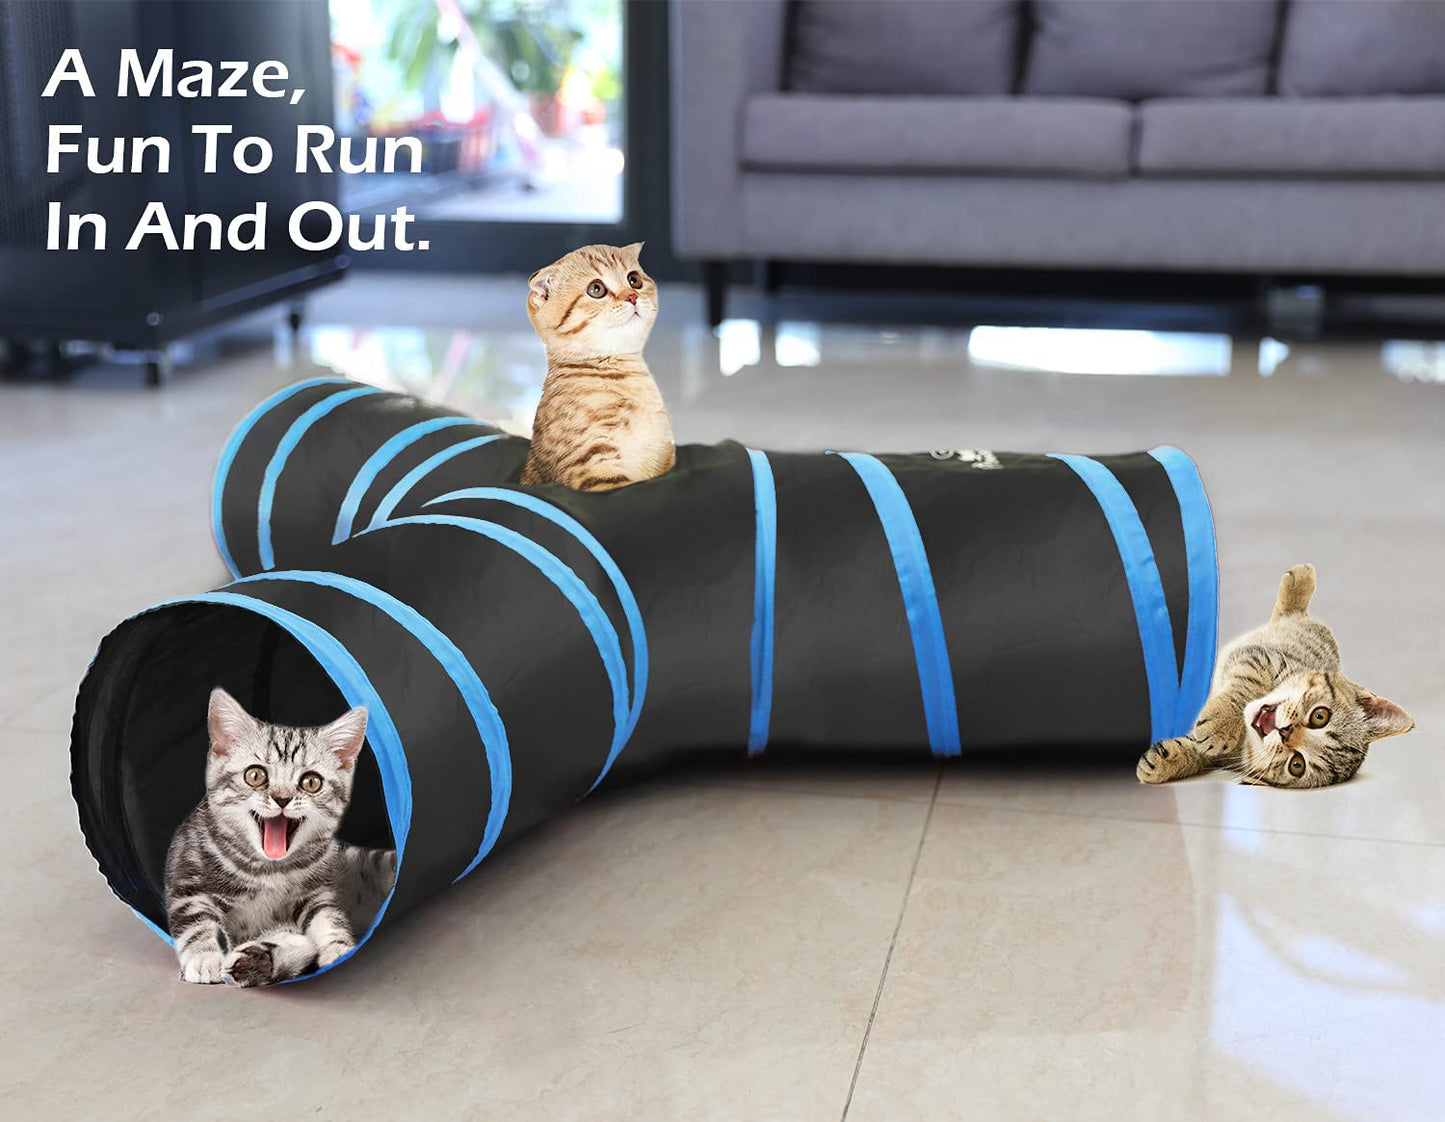 Cat Toys, Cat Tunnel Tube 3-Way Tunnels 25X40Cm Extensible Collapsible Cat Play Tent Interactive Toy Maze Cat House Bed with Balls and Bells for Cat Kitten Kitty Rabbit Small Animal, Blue